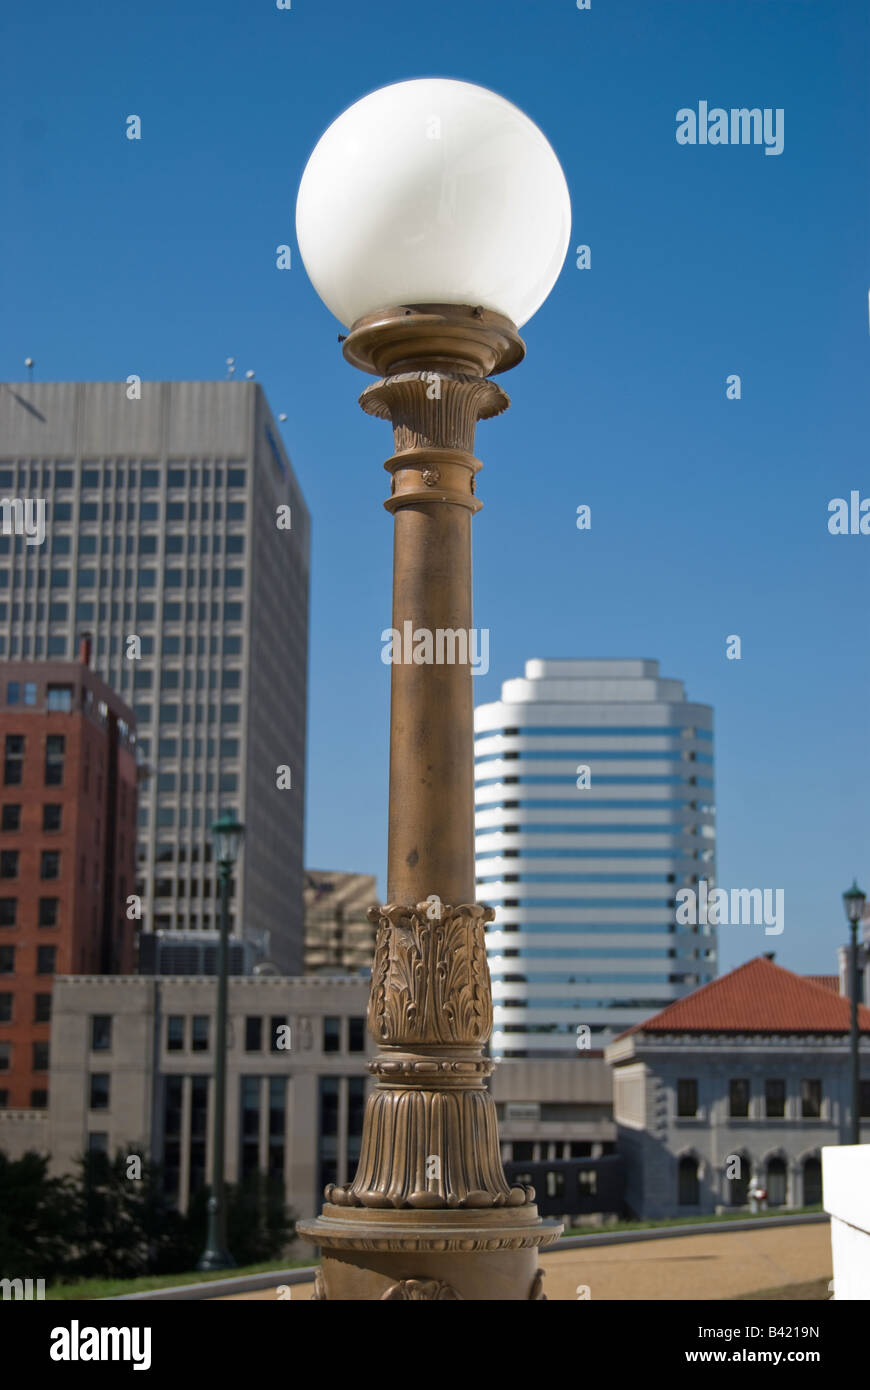 View of downtown Richmond, Virginia from the side steps of the Virginia State Capitol building. Lightpost in foreground. Stock Photo